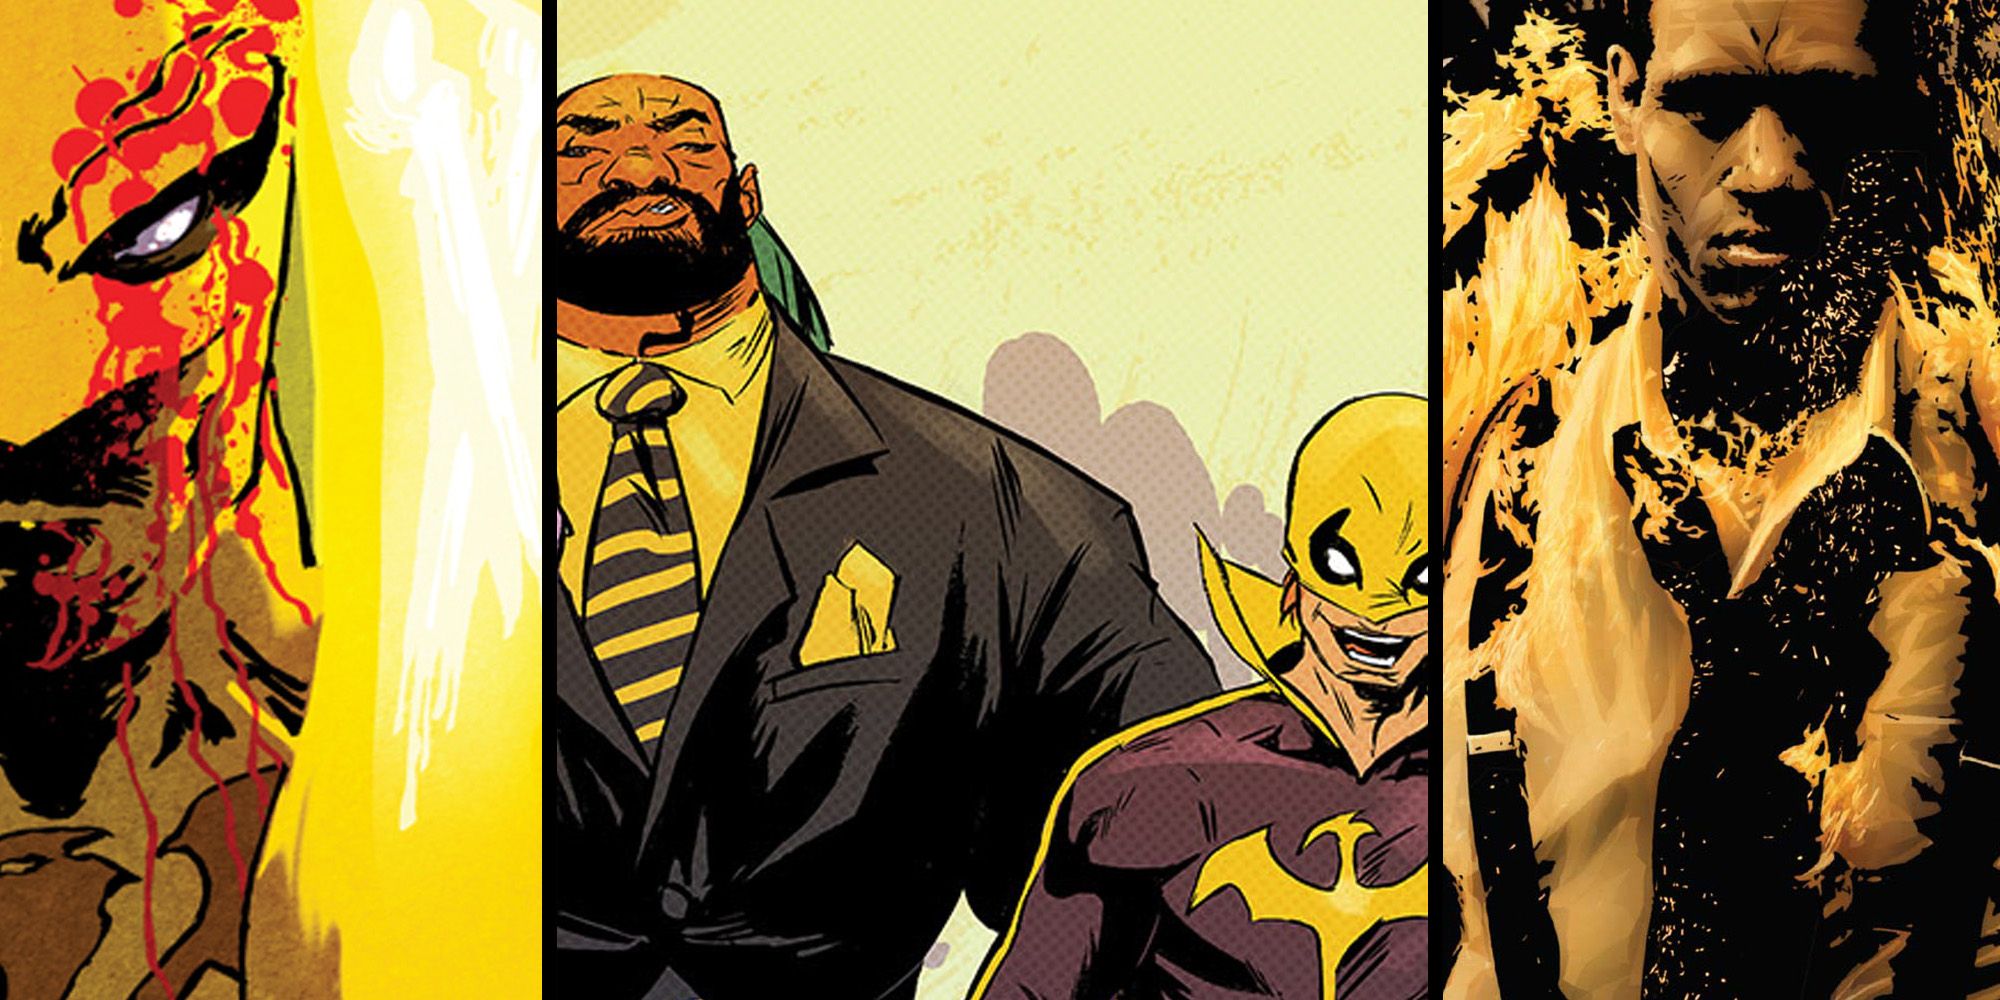 Power Man and Iron Fist #56 Reviews